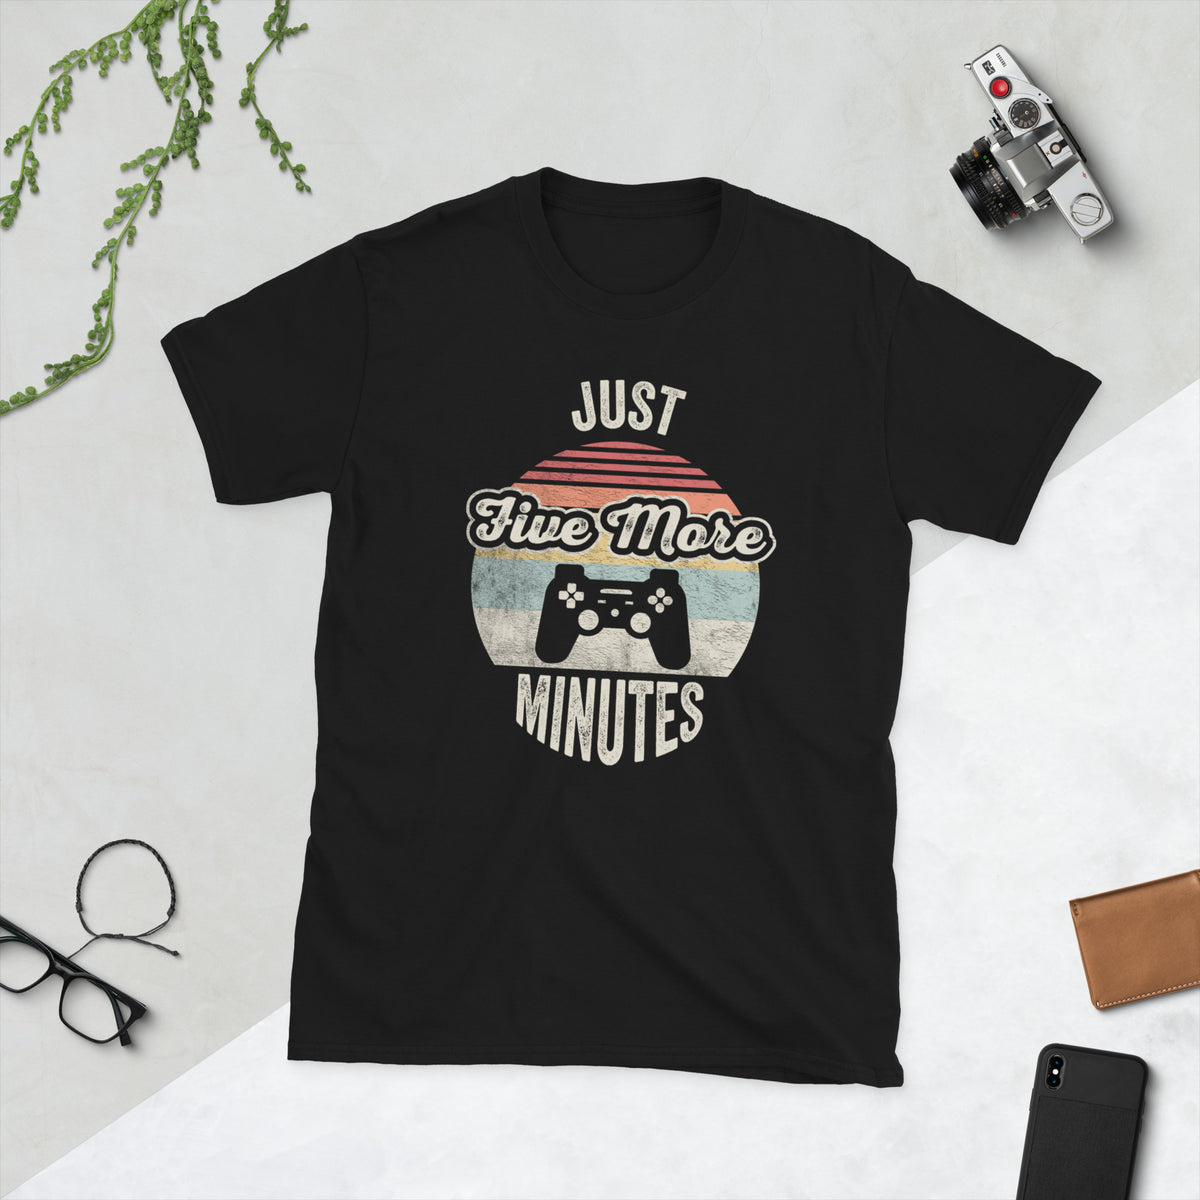 Just Five More Minutes T-Shirt